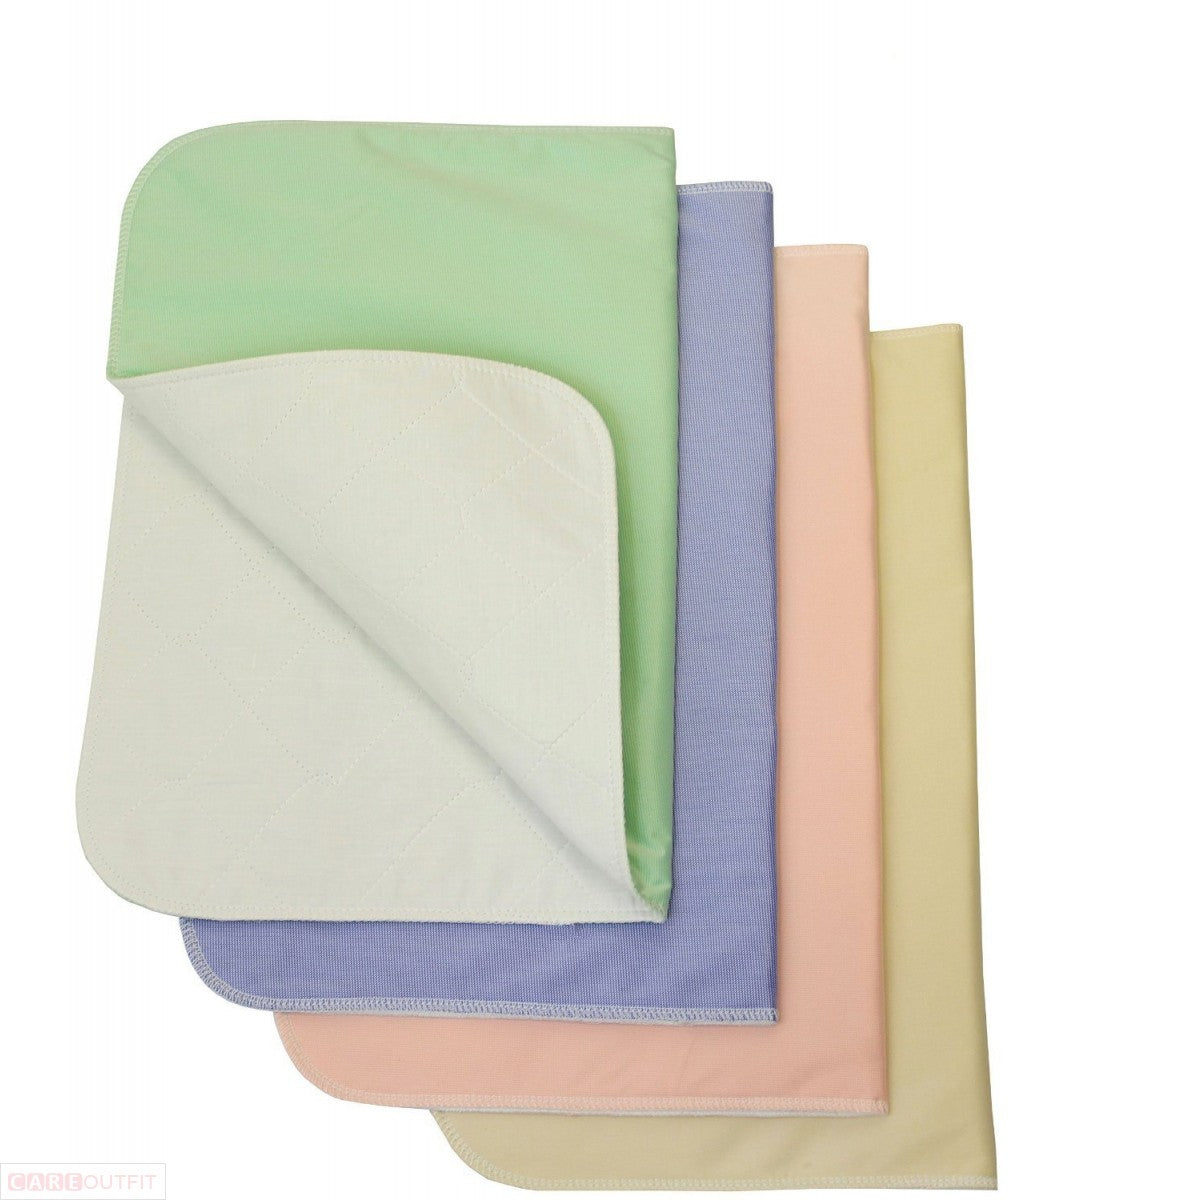 Careoutfit Washable Bed Pads/Reusable Incontinence Underpads